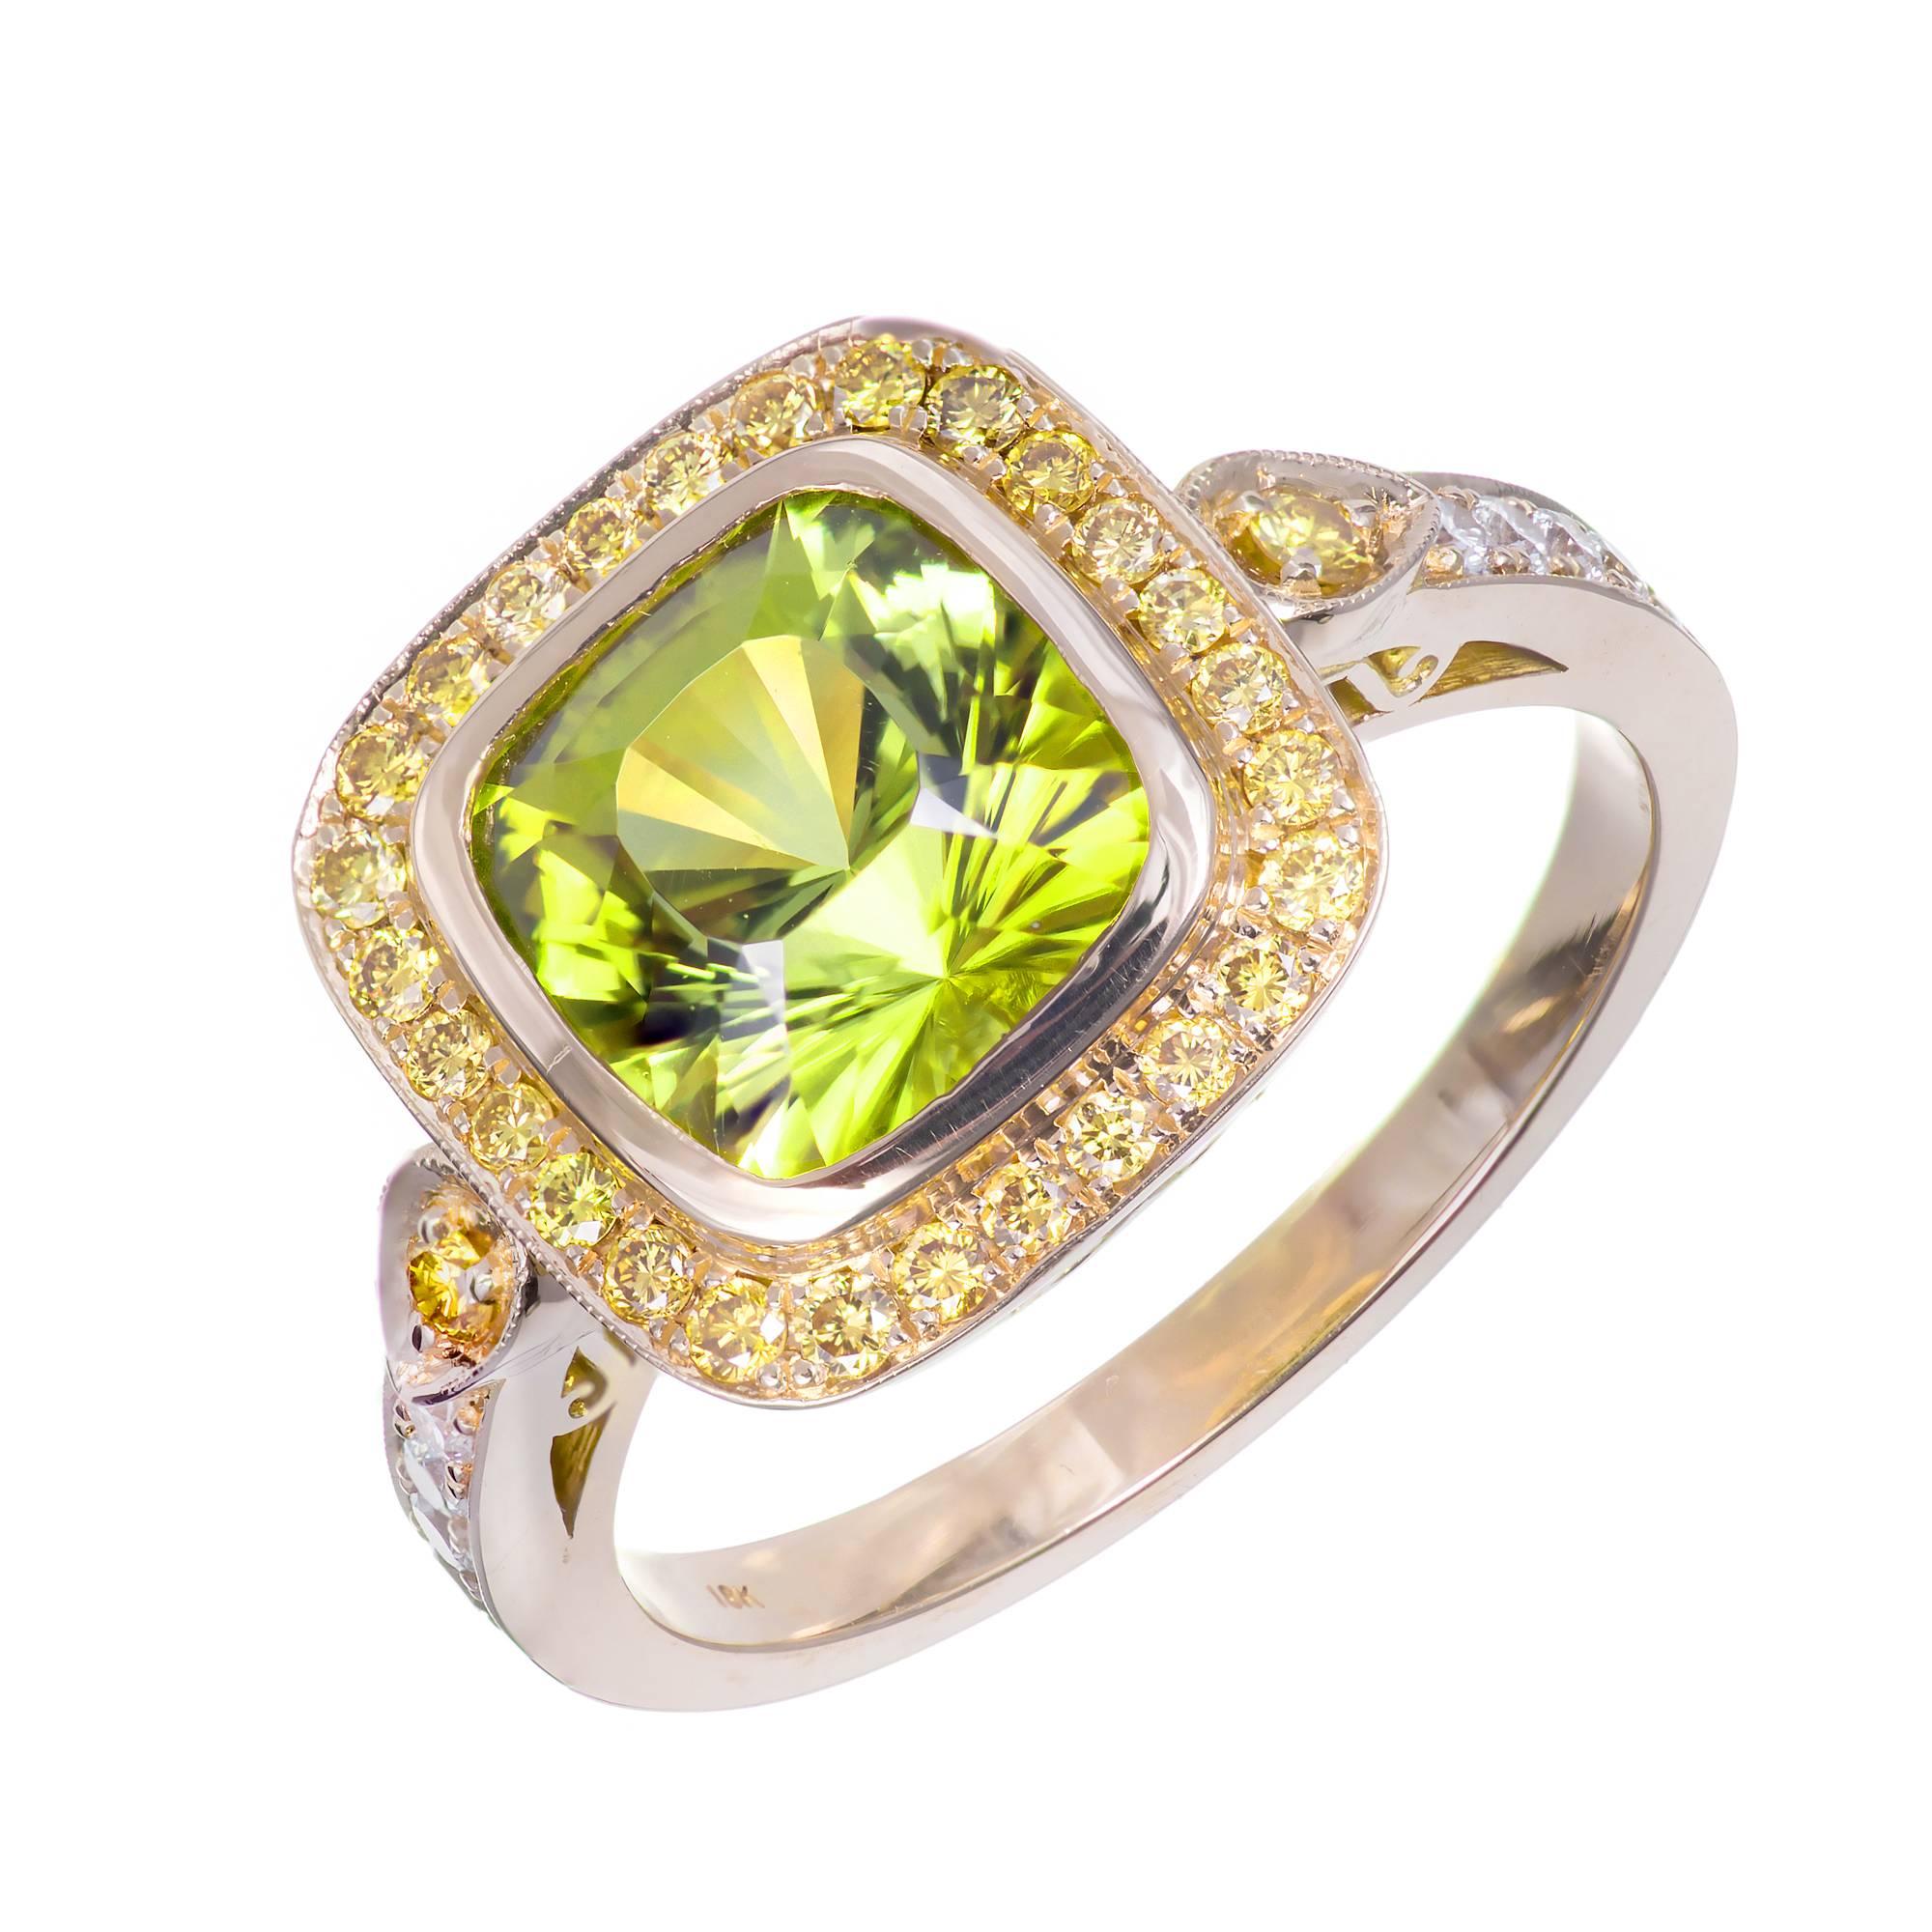 Peter Suchy original design ring with natural fancy yellow Diamonds surrounding an extremely special and rare estate Tourmaline. The Tourmaline is AGL certified as natural and untreated of yellow green Peridot like color. The center stone is from an